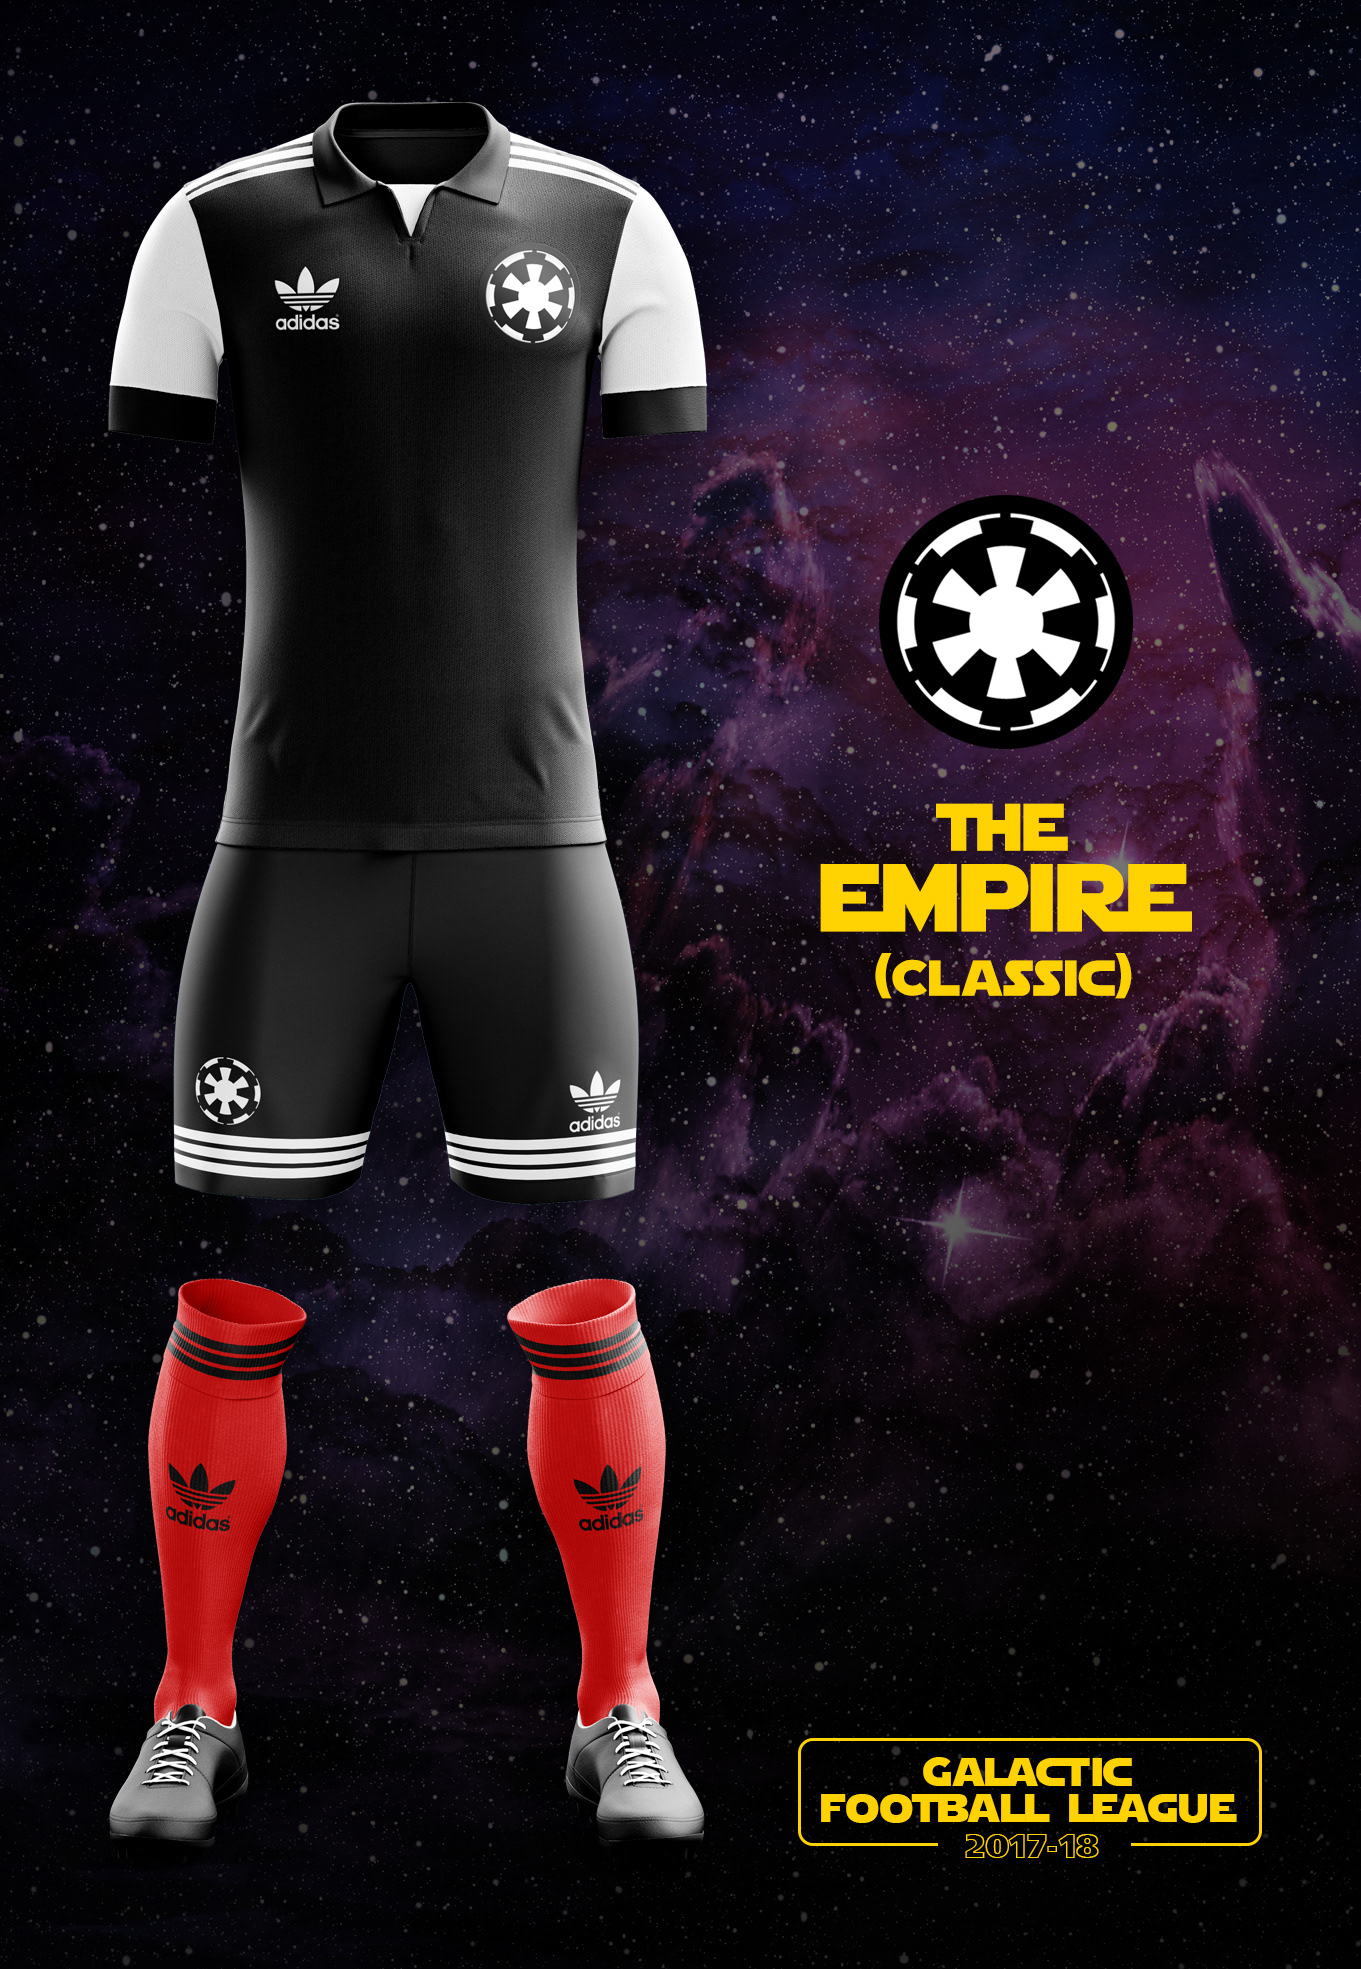 These Star Wars themed football kits are spectacular